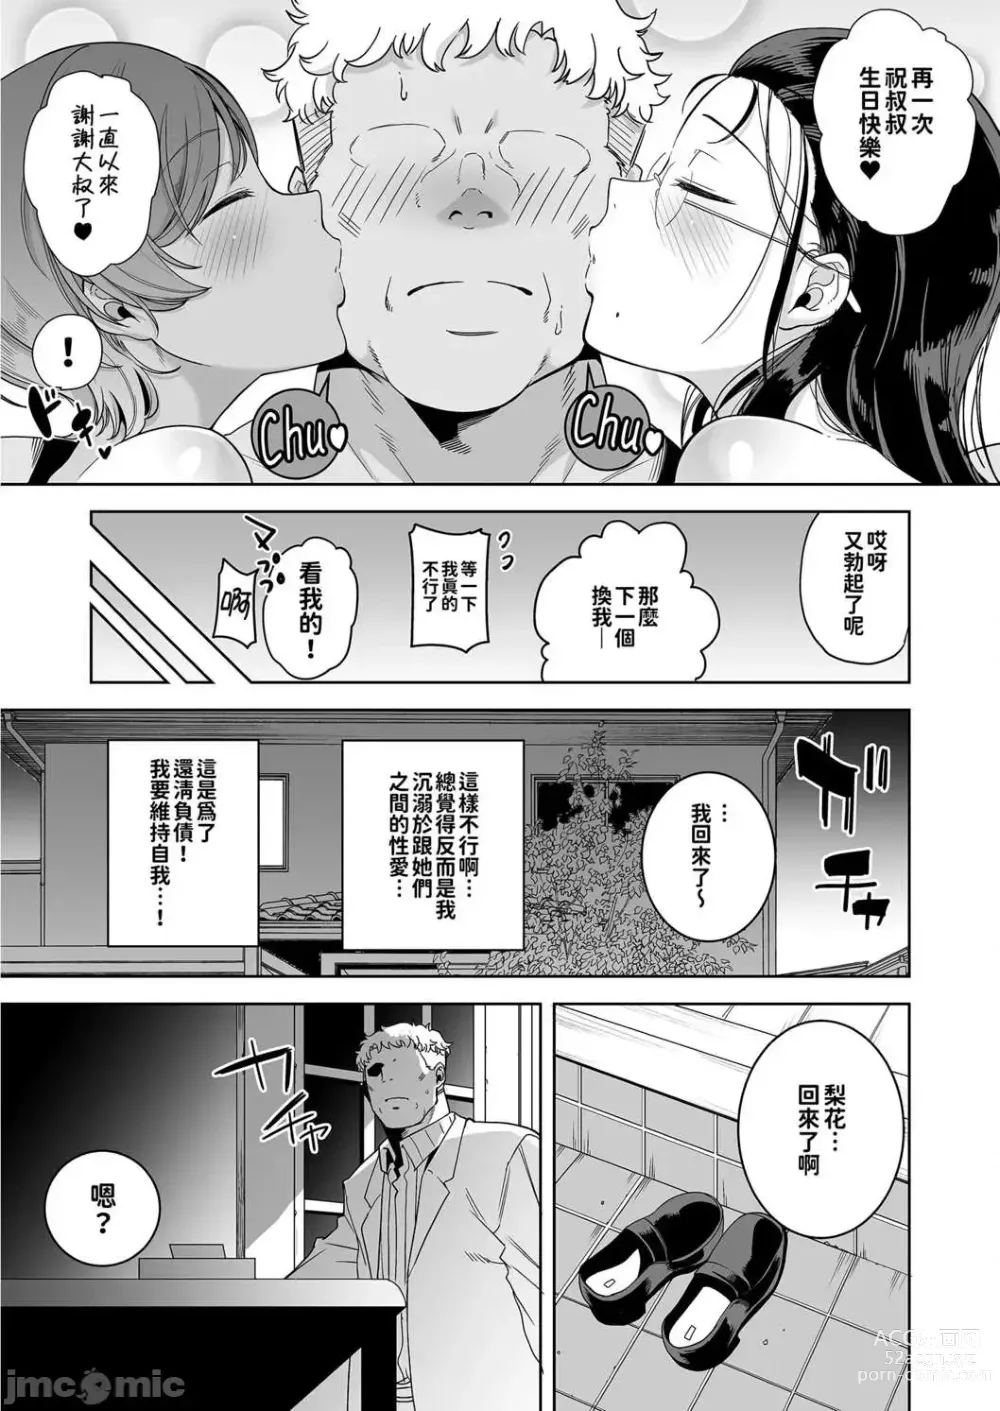 Page 93 of doujinshi Seika Girls Academys Officially Approved Prostitute Man 1 + 2 + 3